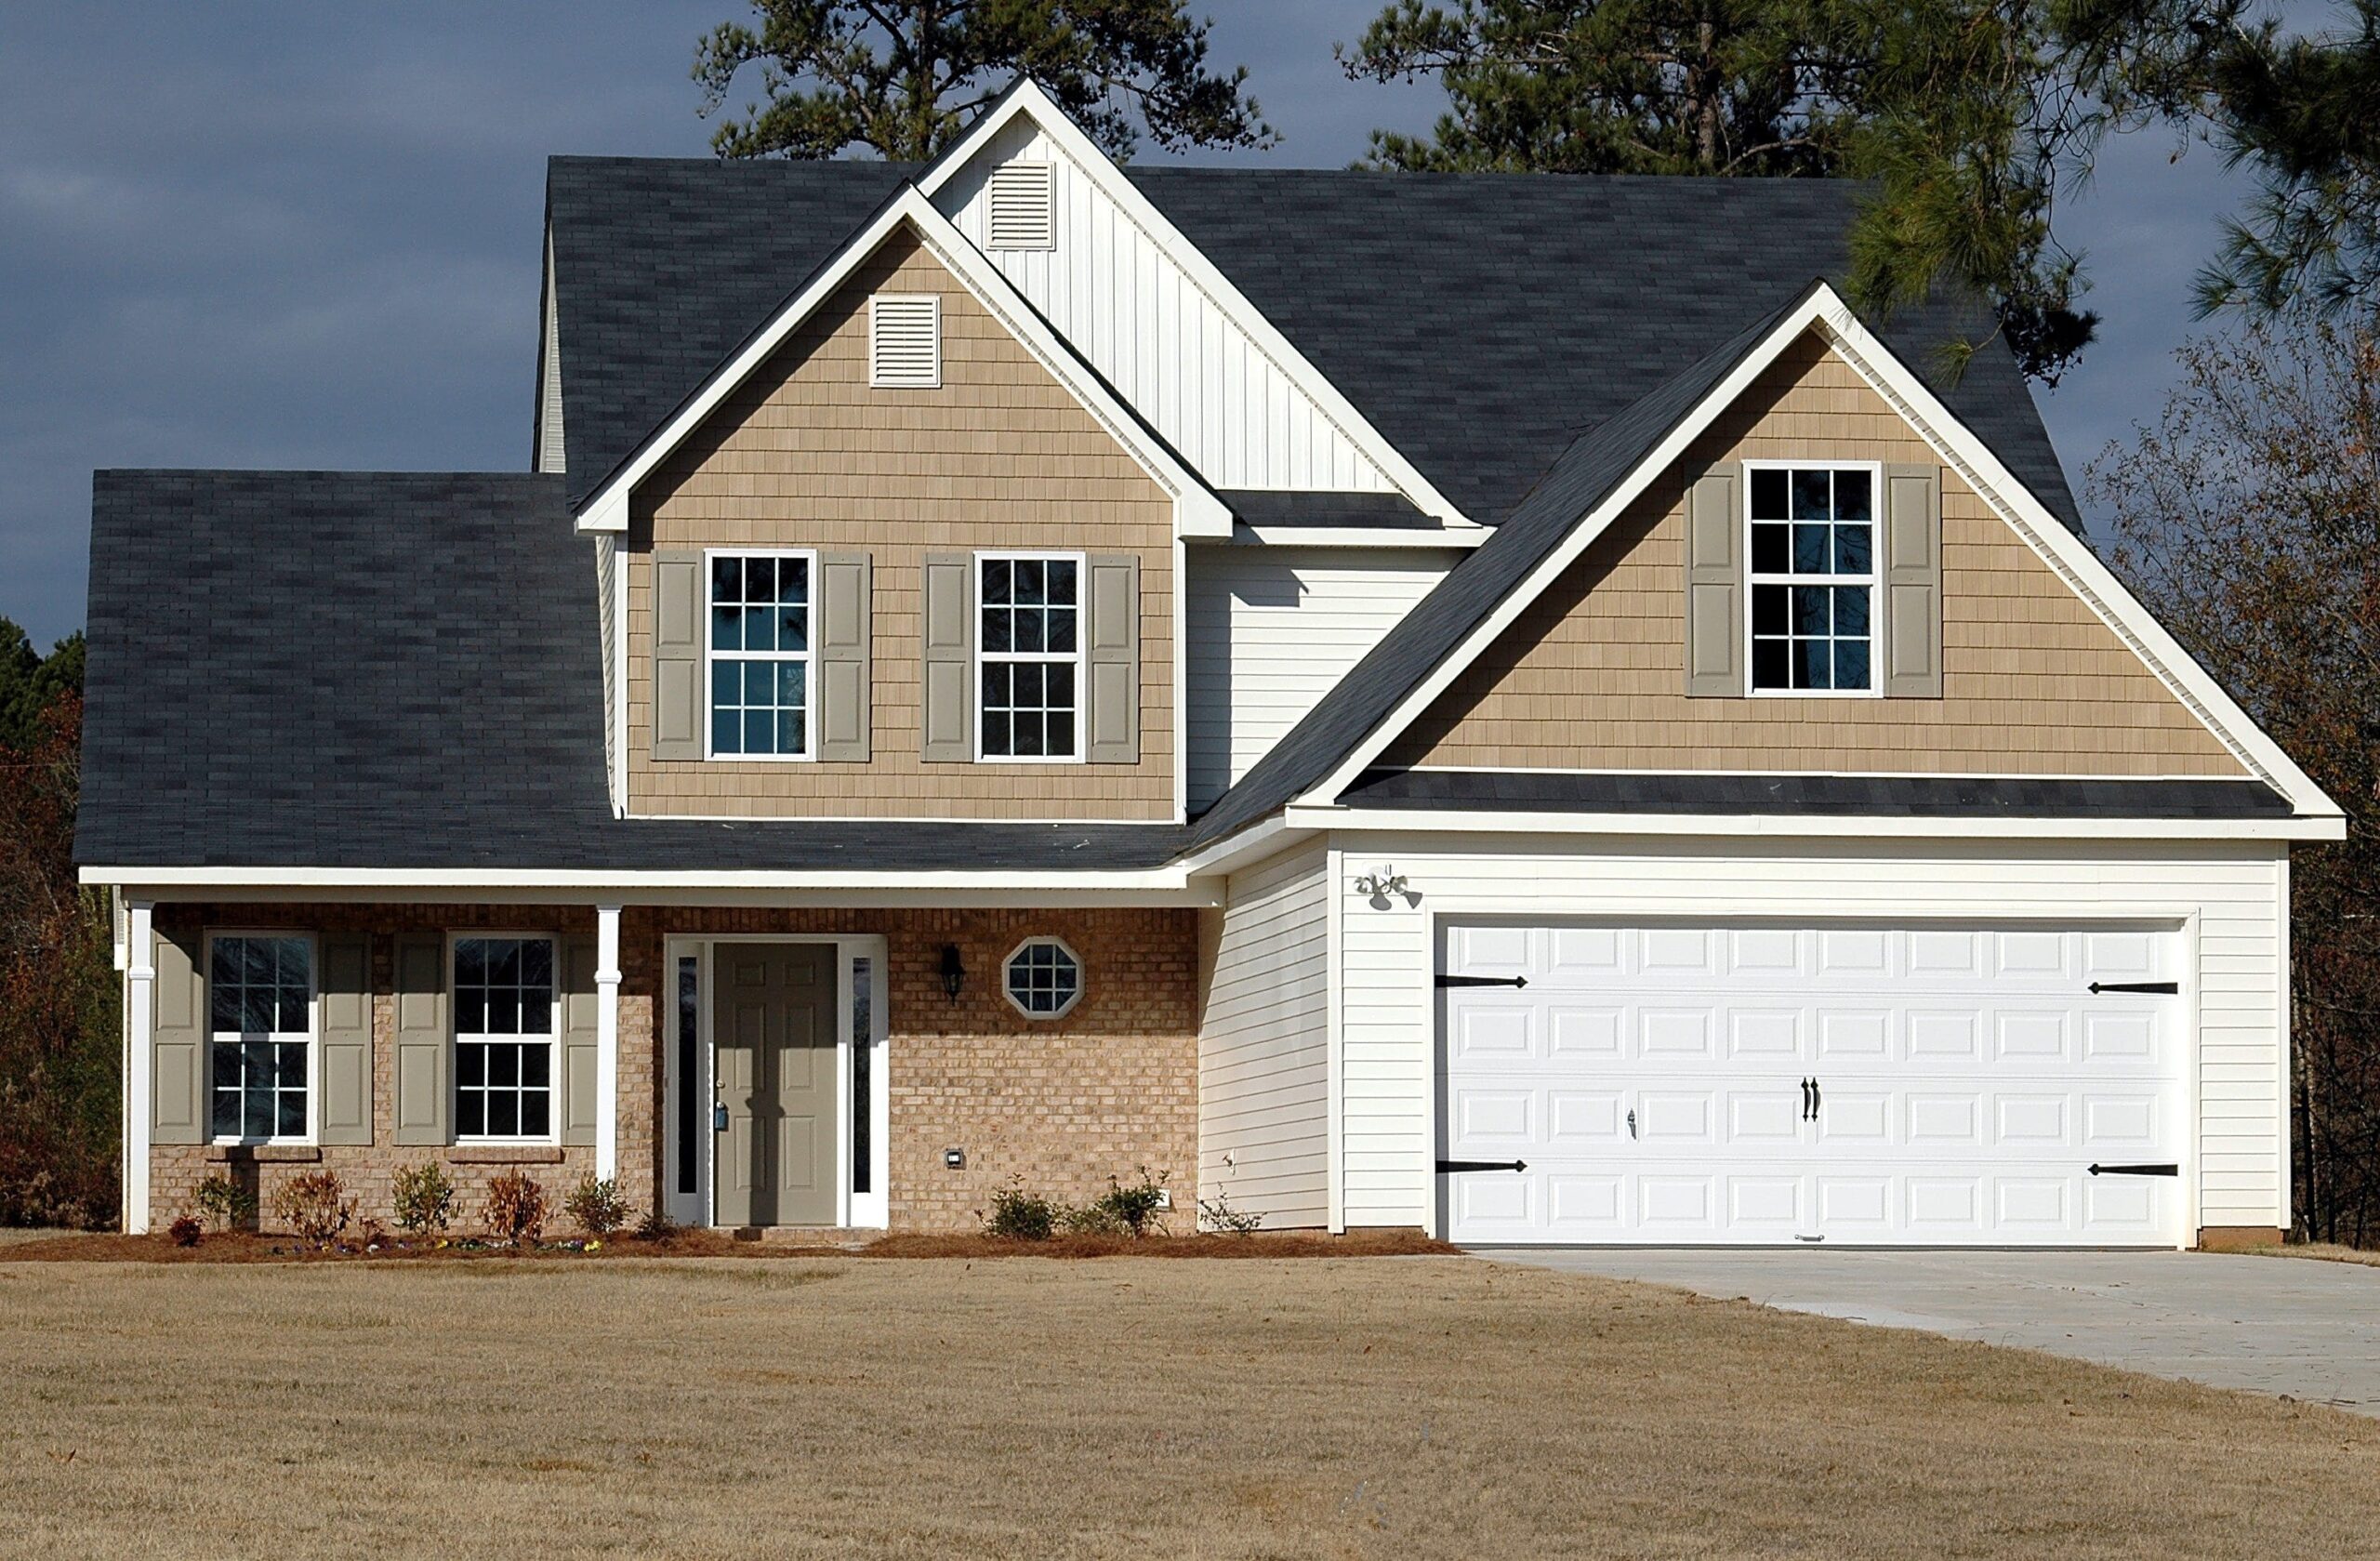 Complete Residential Contractor Services Siding, Roofing, Door and Gutter Installation and Repair